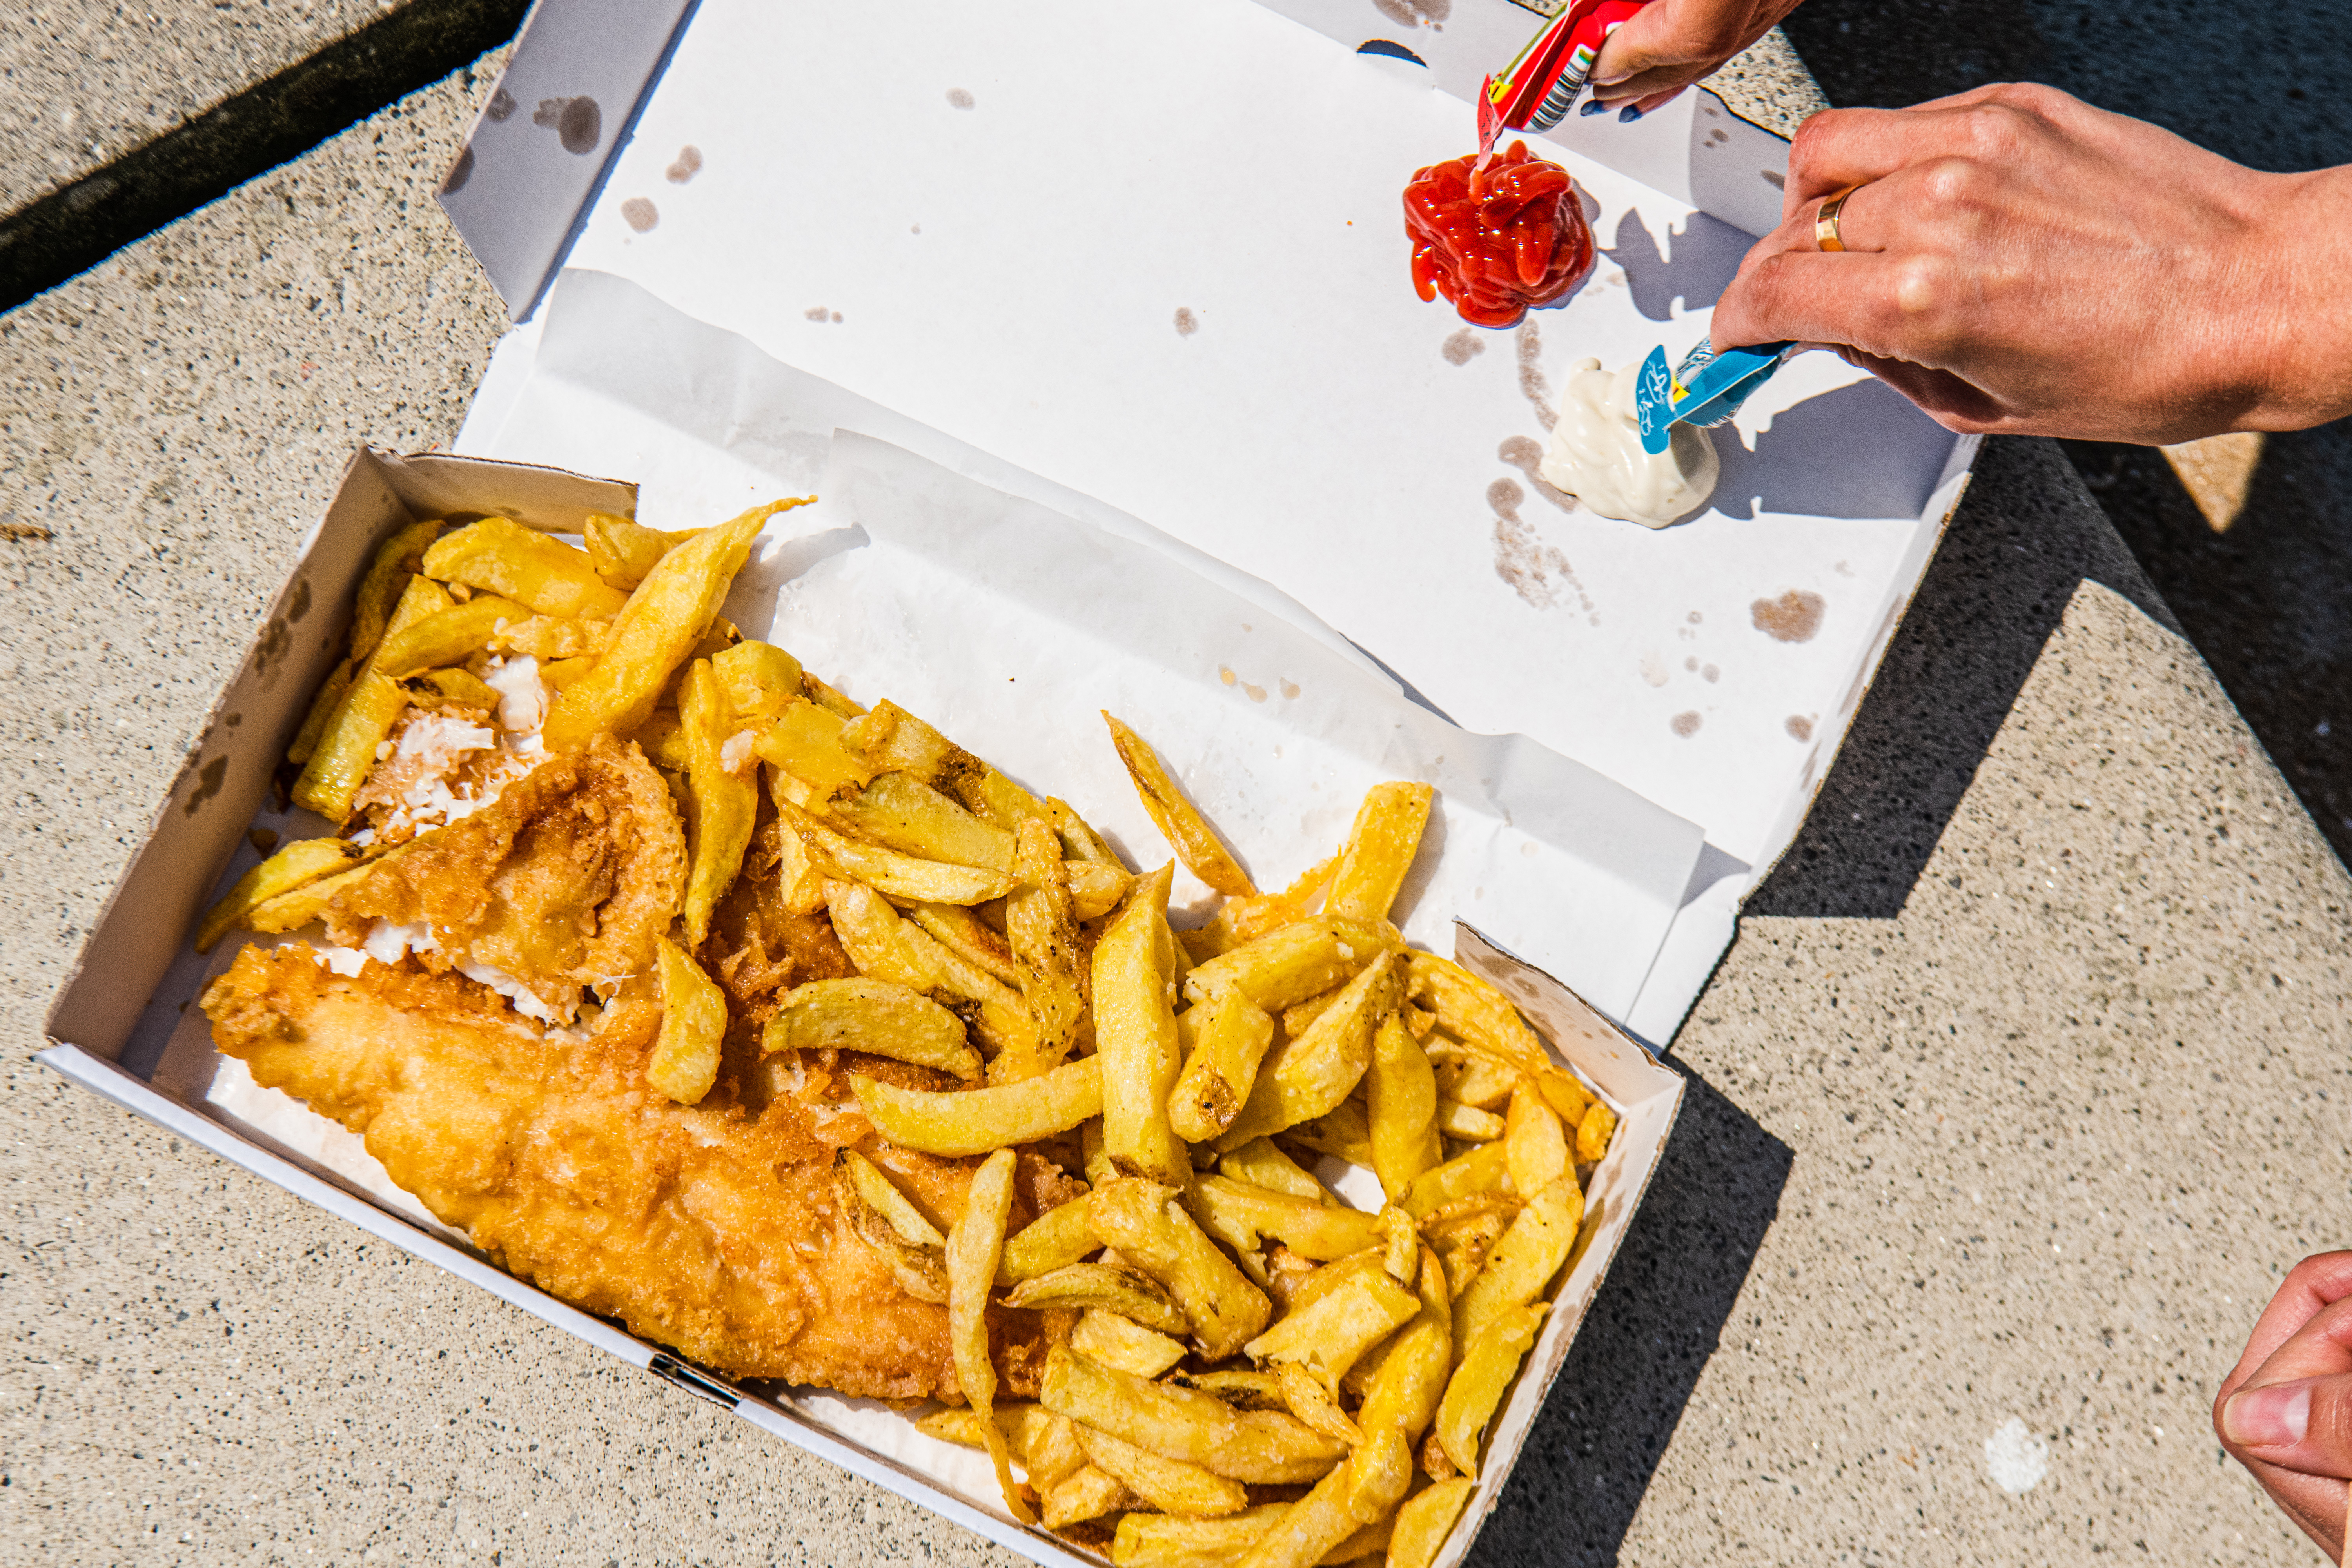 http://res.cloudinary.com/the-infatuation/image/upload/v1687196989/images/Peter_s_Fish_Factory_Fish_Chips_Aleksandra_Boruch_London34_rdrcy7.jpg